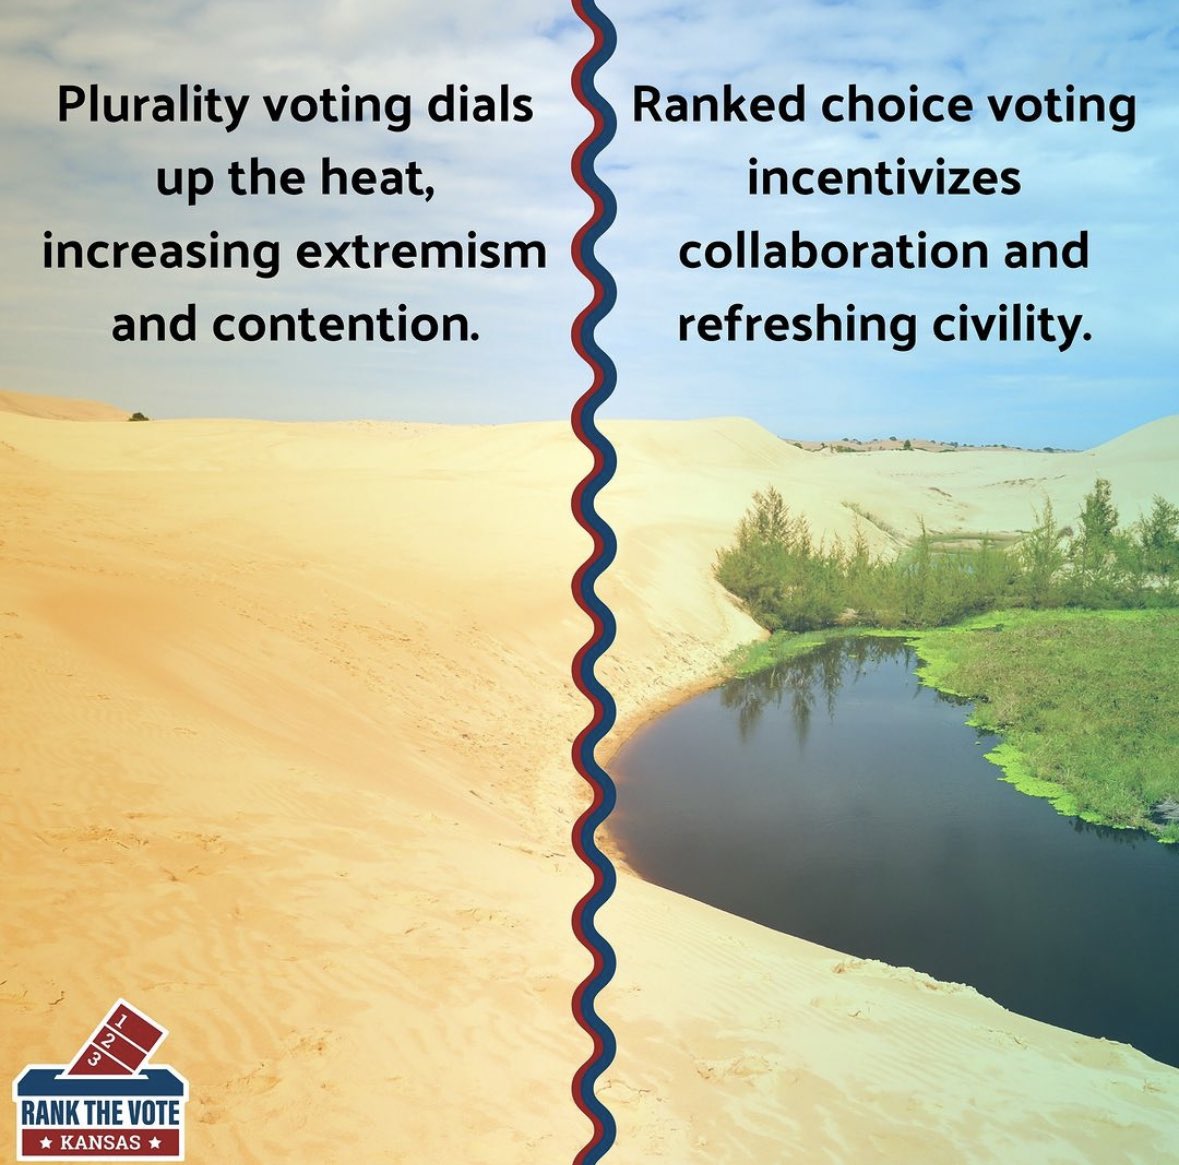 A great graphic from @rankthevote Kansas! RCV encourages positive campaigning, not mudslinging, because candidates must compete for second and third place votes. 
-
#political #innovation #positivity #politics #rankedchoicevoting #rcv #election #campaign